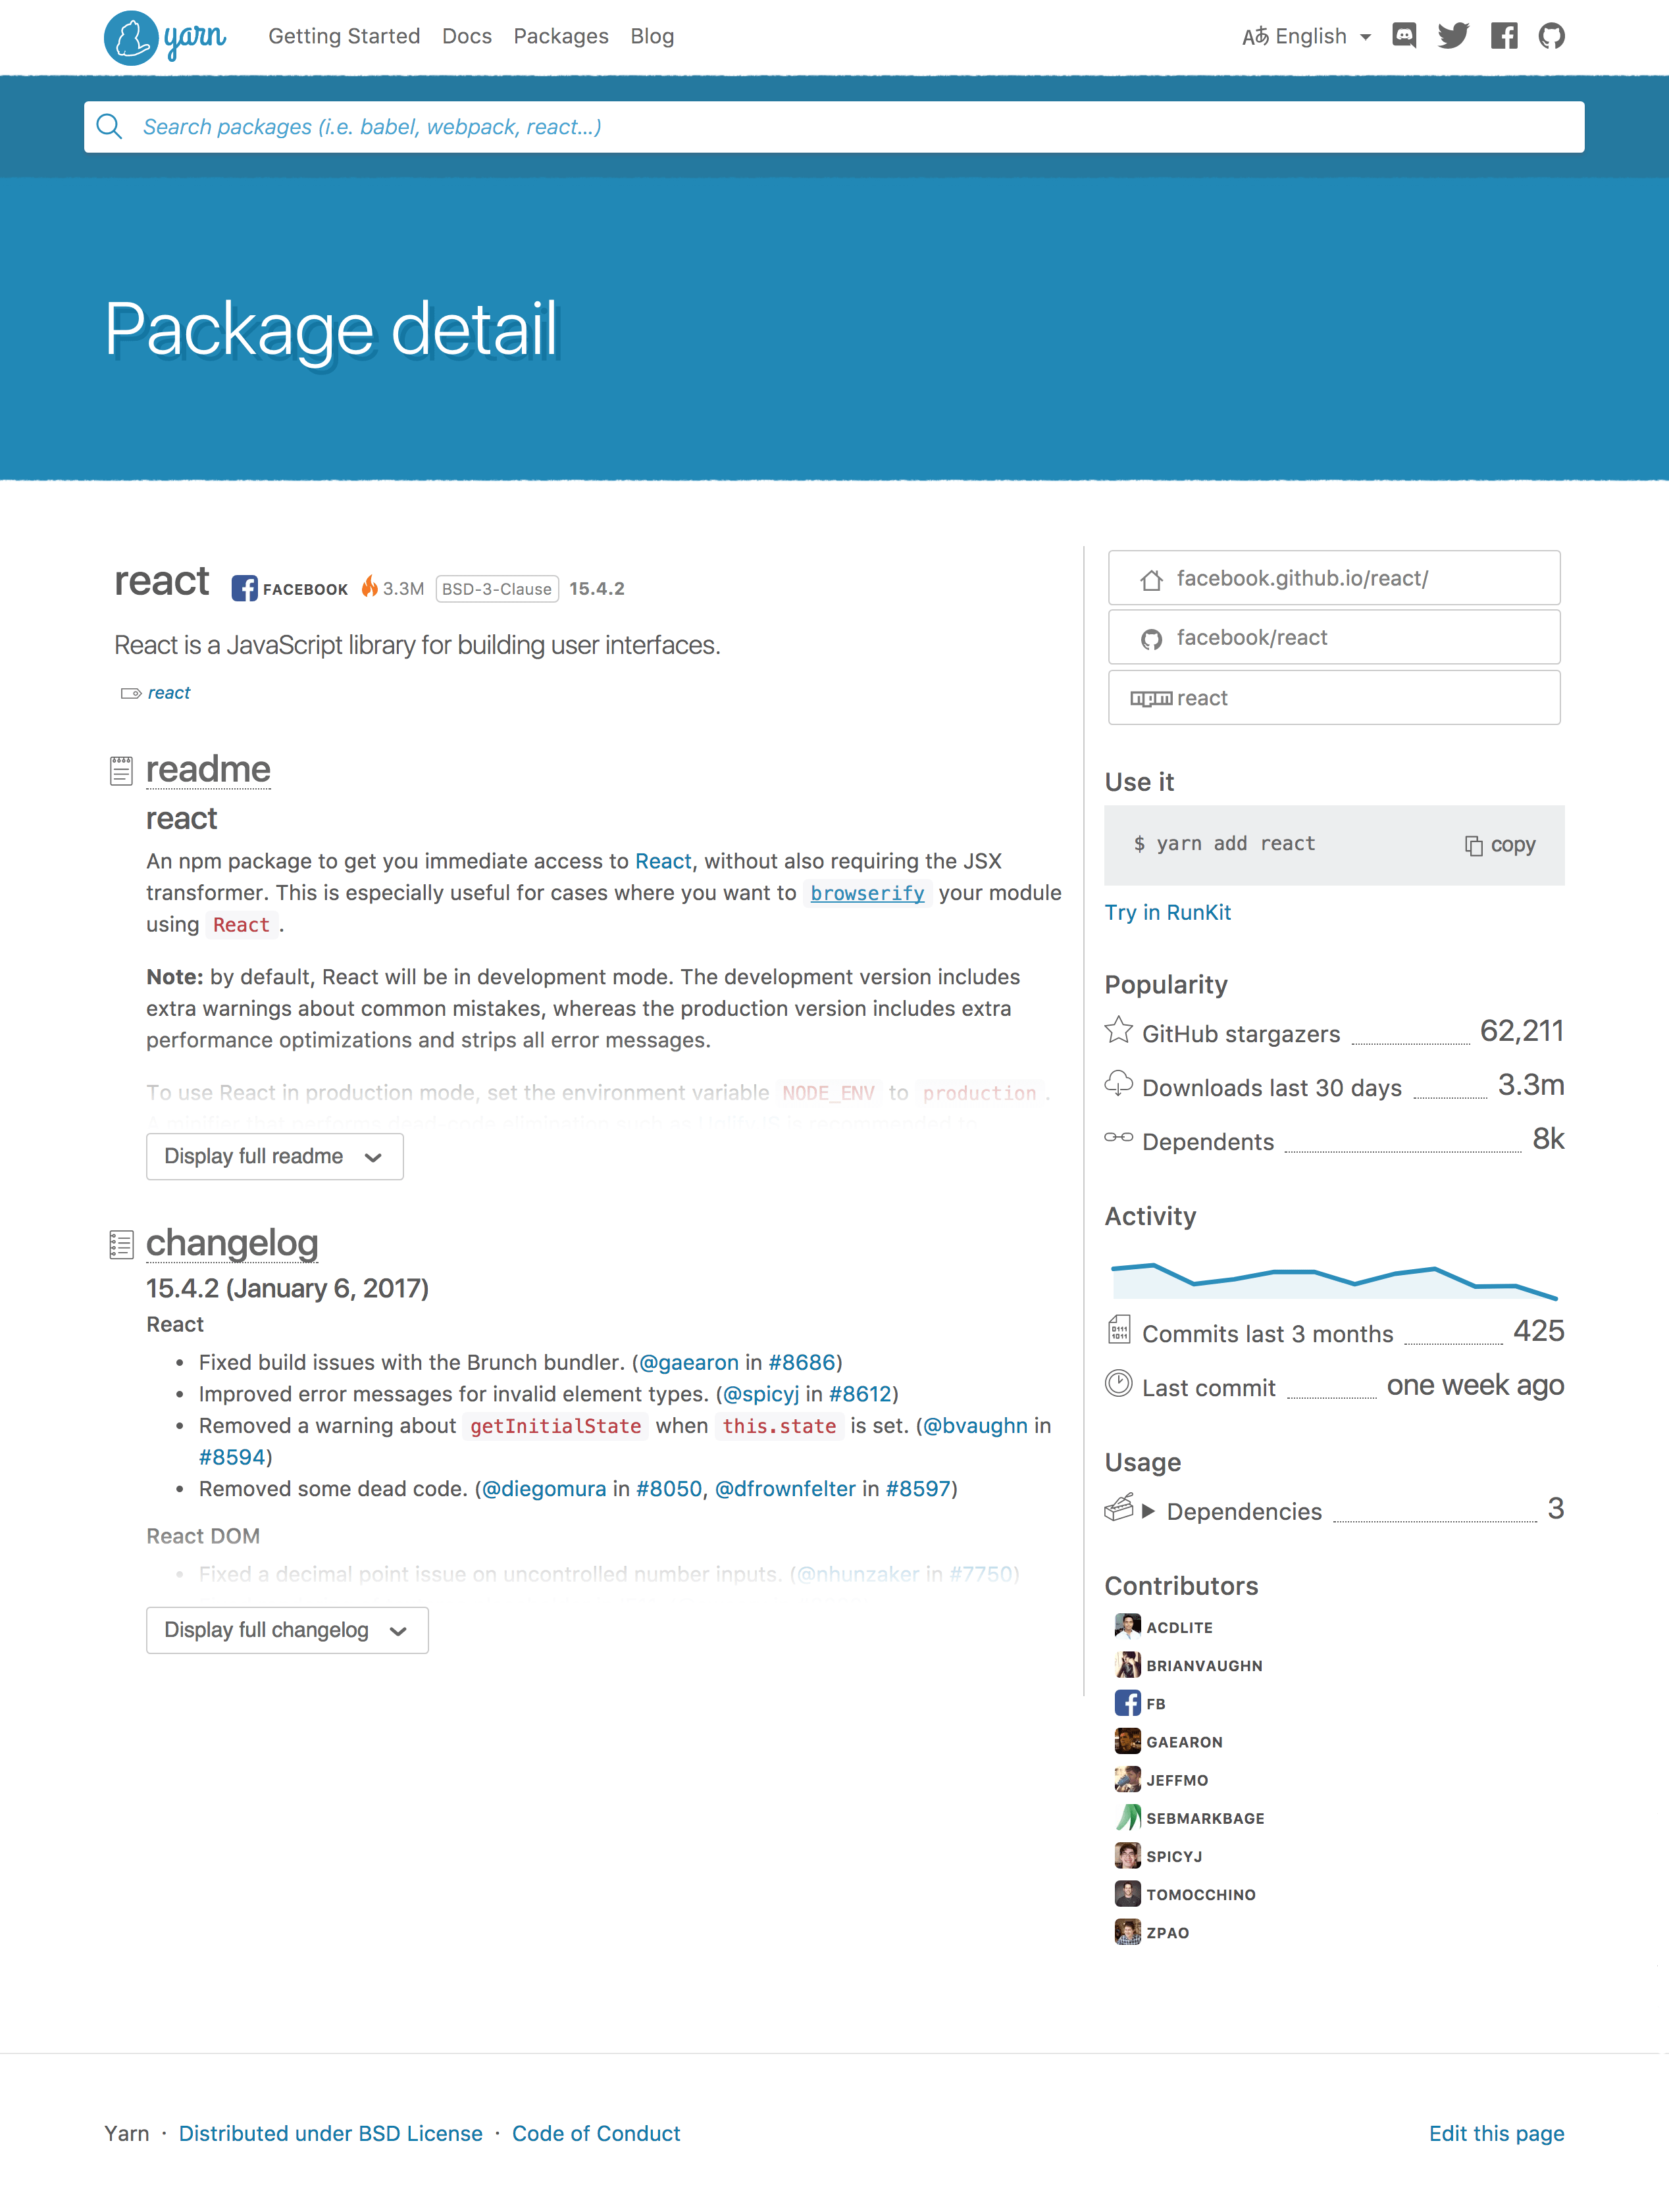 preview of the detail page of yarnpkg.com, showing the React page